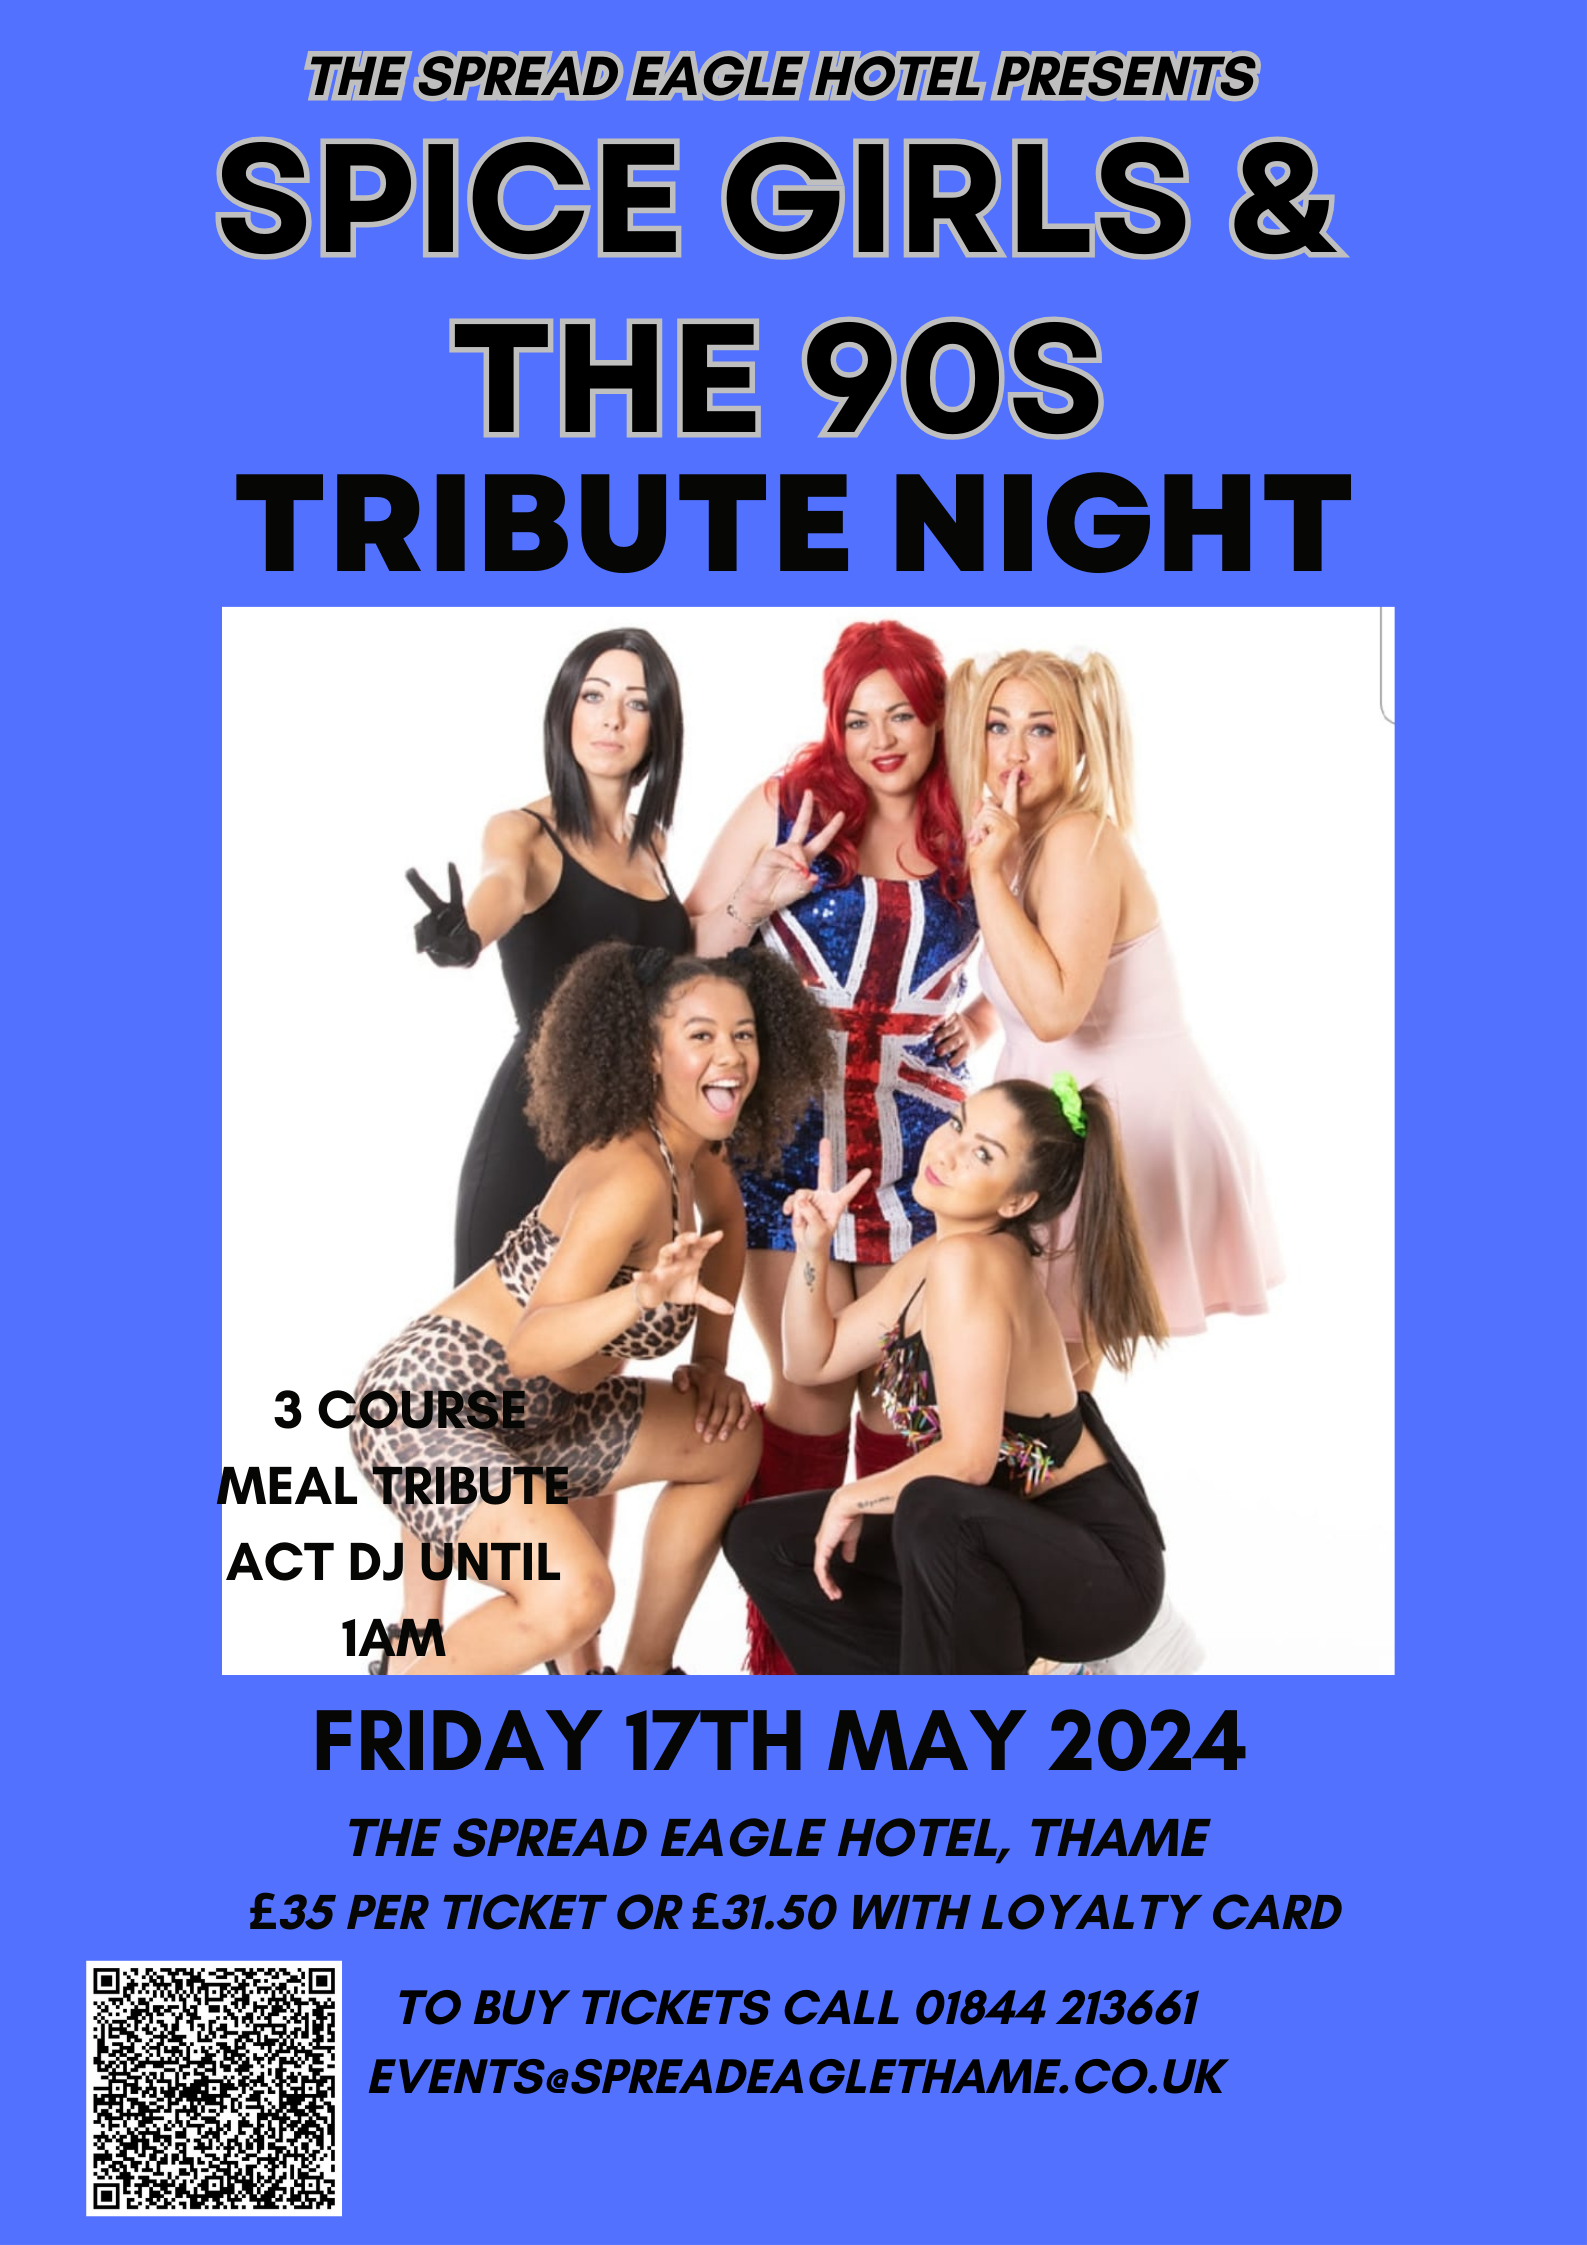 Spice Girls & The 90s Tribute Night at the Spread Eagle Hotel